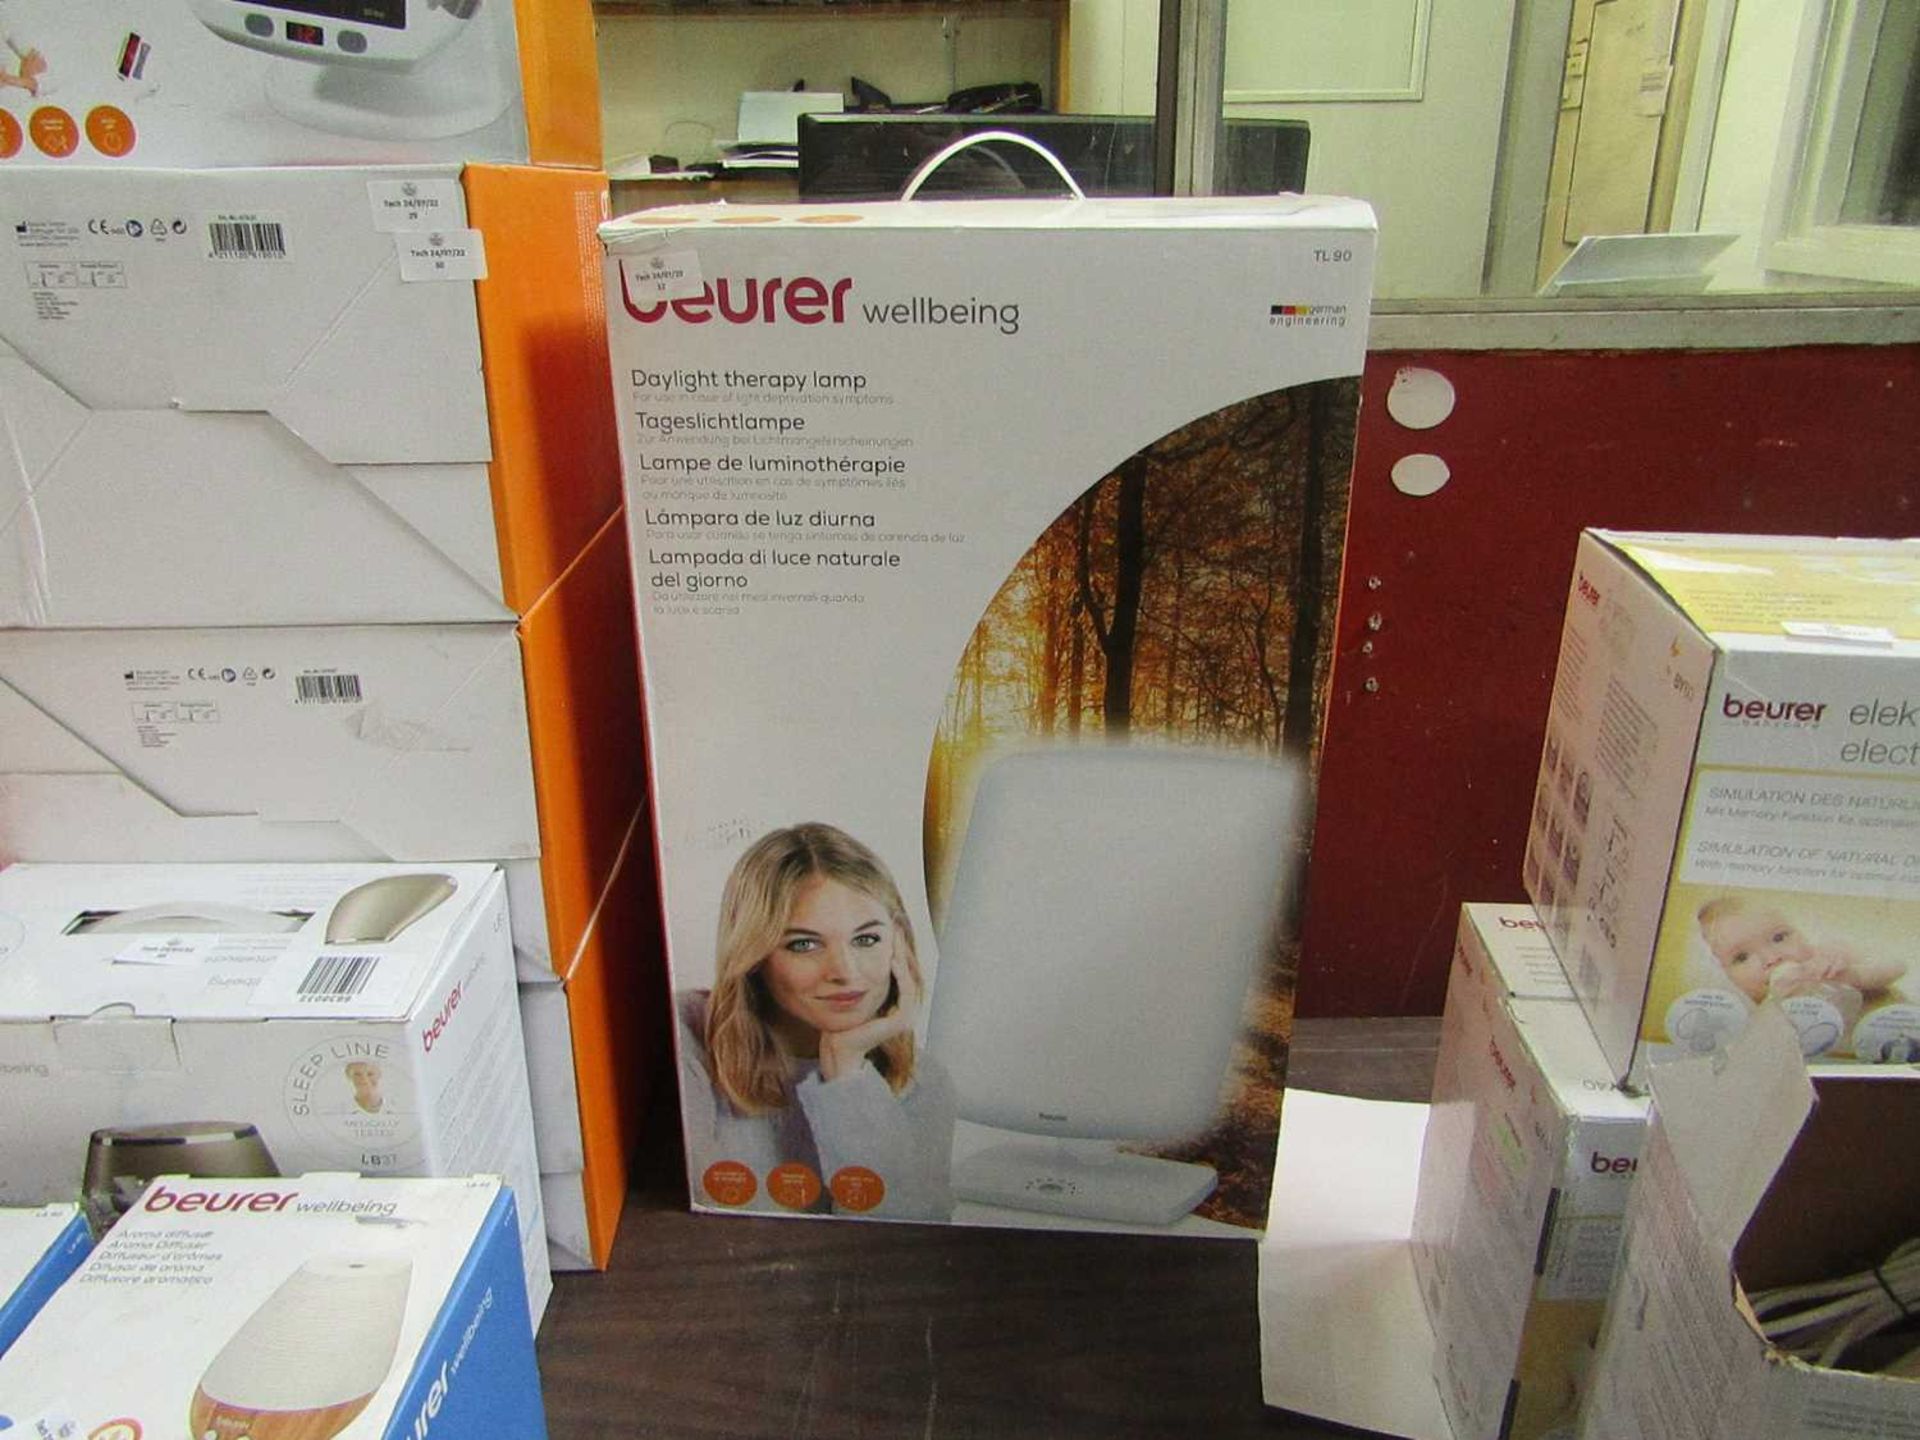 VAT 1x Beurer Wellbeing Daylight Therapy Lamp - This item is graded B - RRP œ130 at Argos